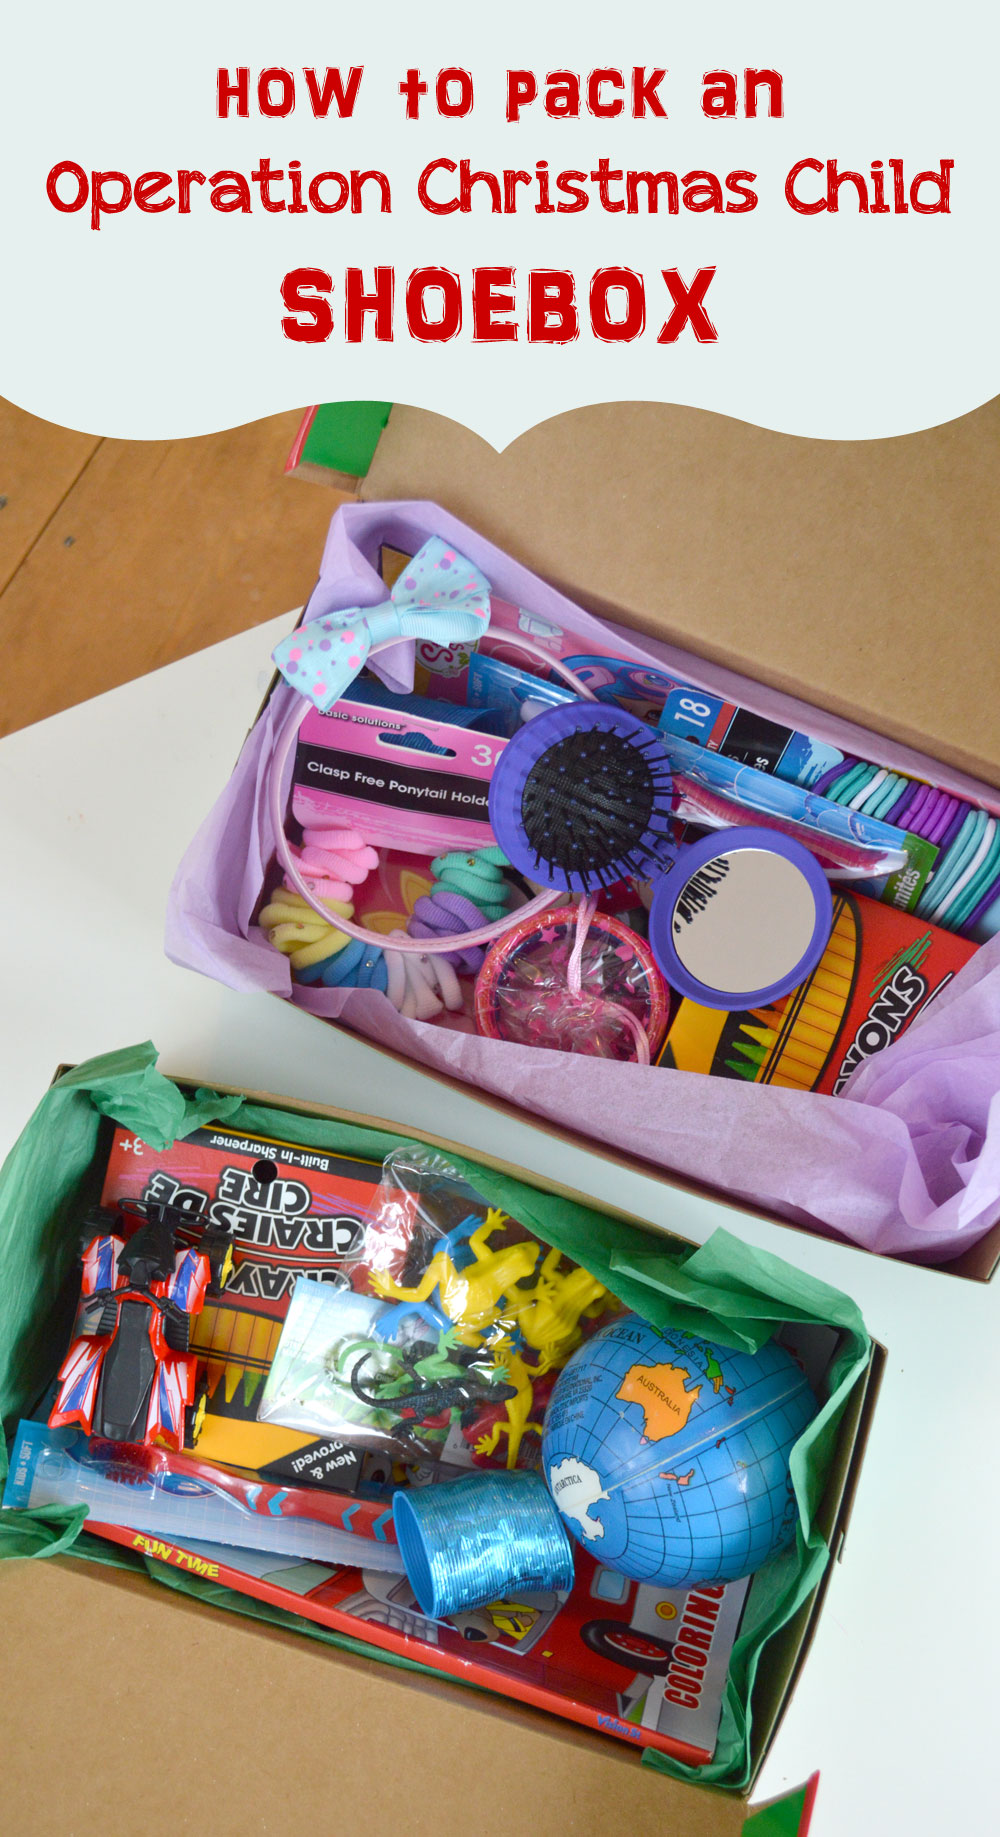 How to Pack an Operation Christmas Child shoebox and kids gift ideas - Mommy Scene